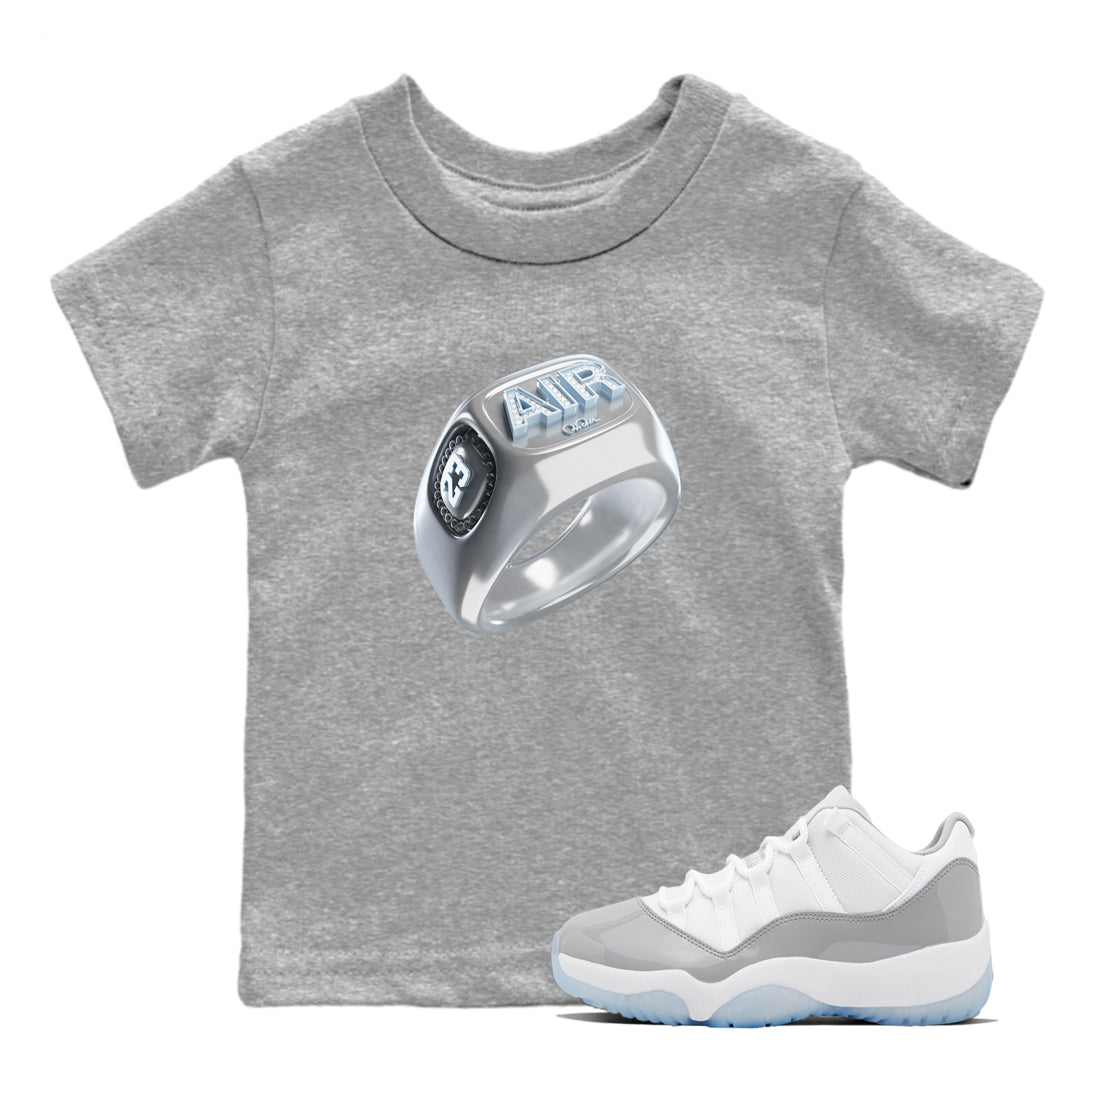 Air Jordan 11 White Cement Diamond Ring Baby and Kids Sneaker Tees Air Jordan 11 Cement Grey Kids Sneaker Tees Size Chart